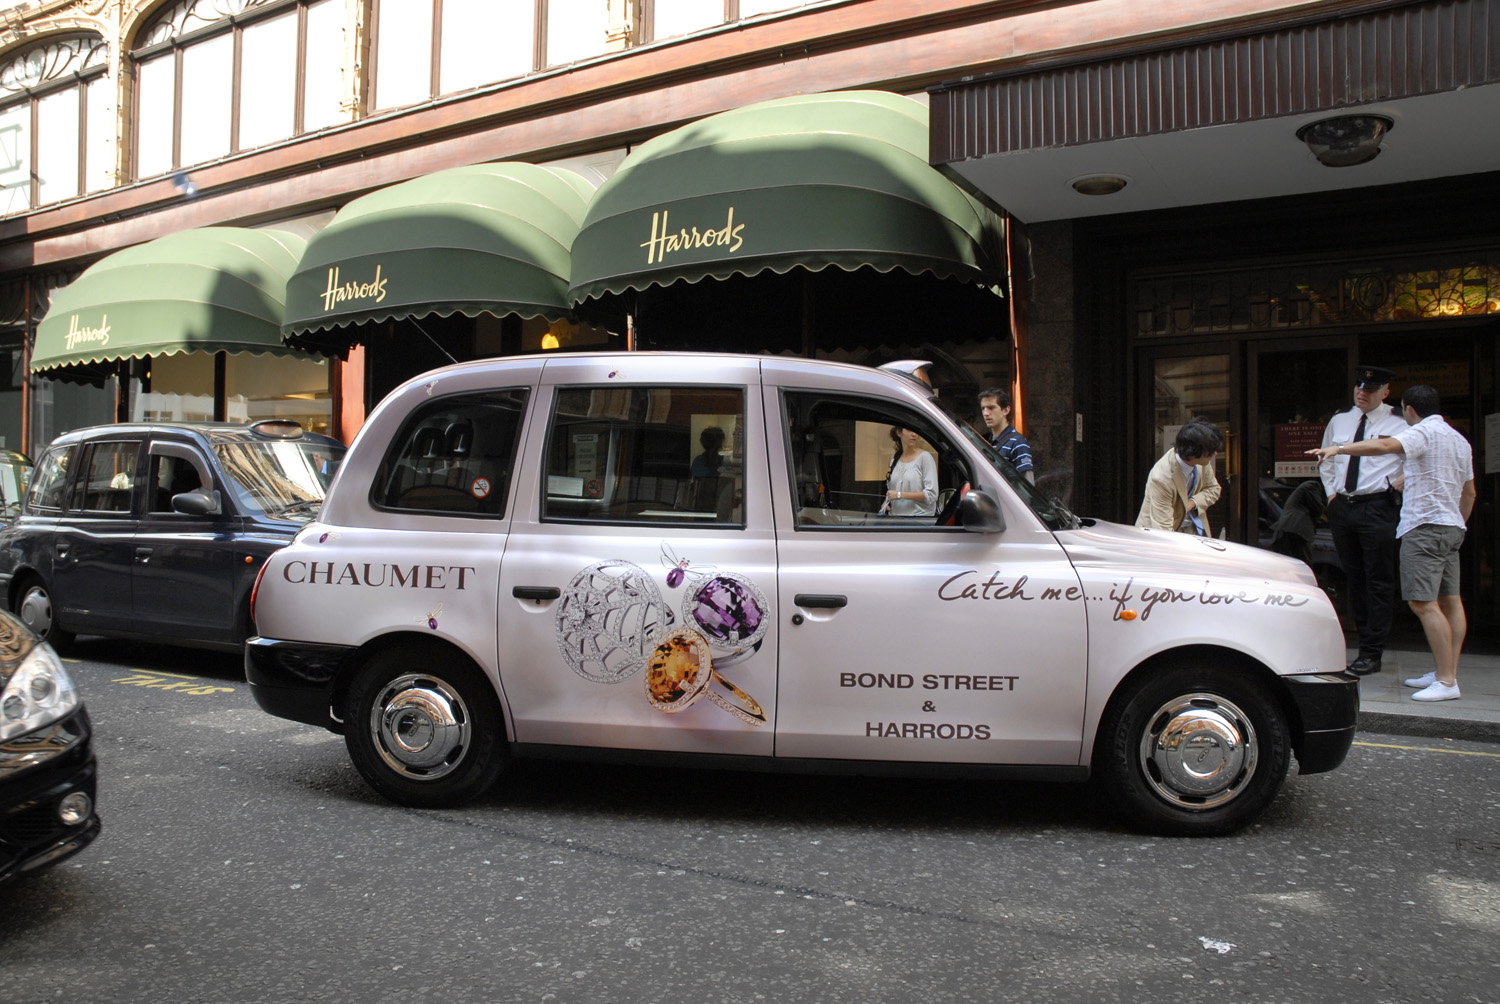 2008 Ubiquitous taxi advertising campaign for Chaumet - Catch me if you love me